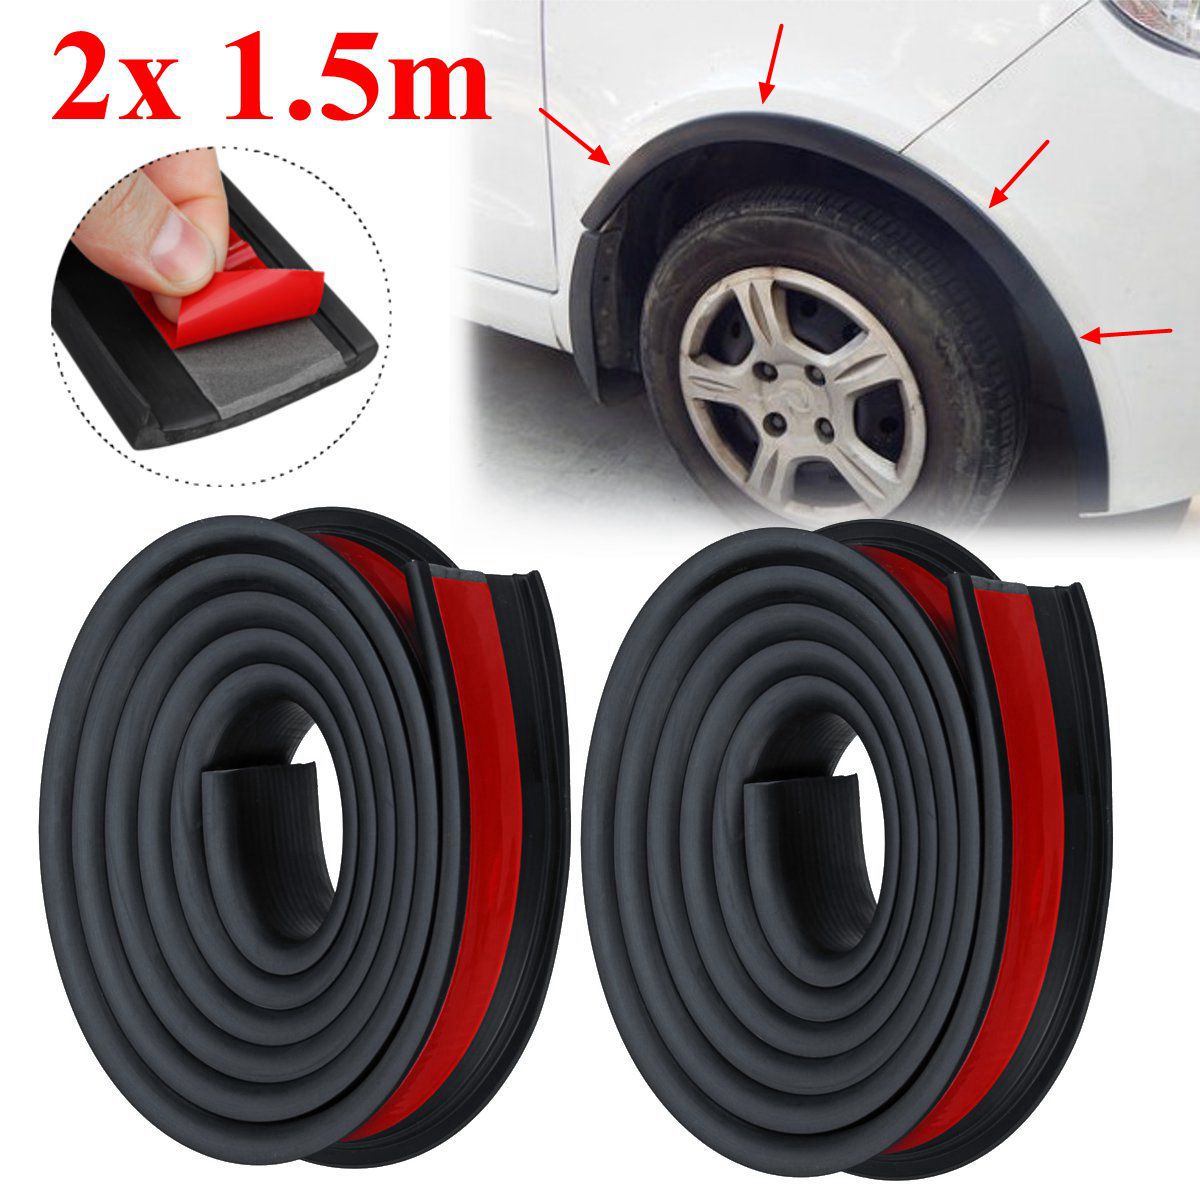 2pcs 1.5m Rubber Car Mudguard Trim Wheel Arch Protection Moldings for most cars trucks SUVs Car Styling Moulding